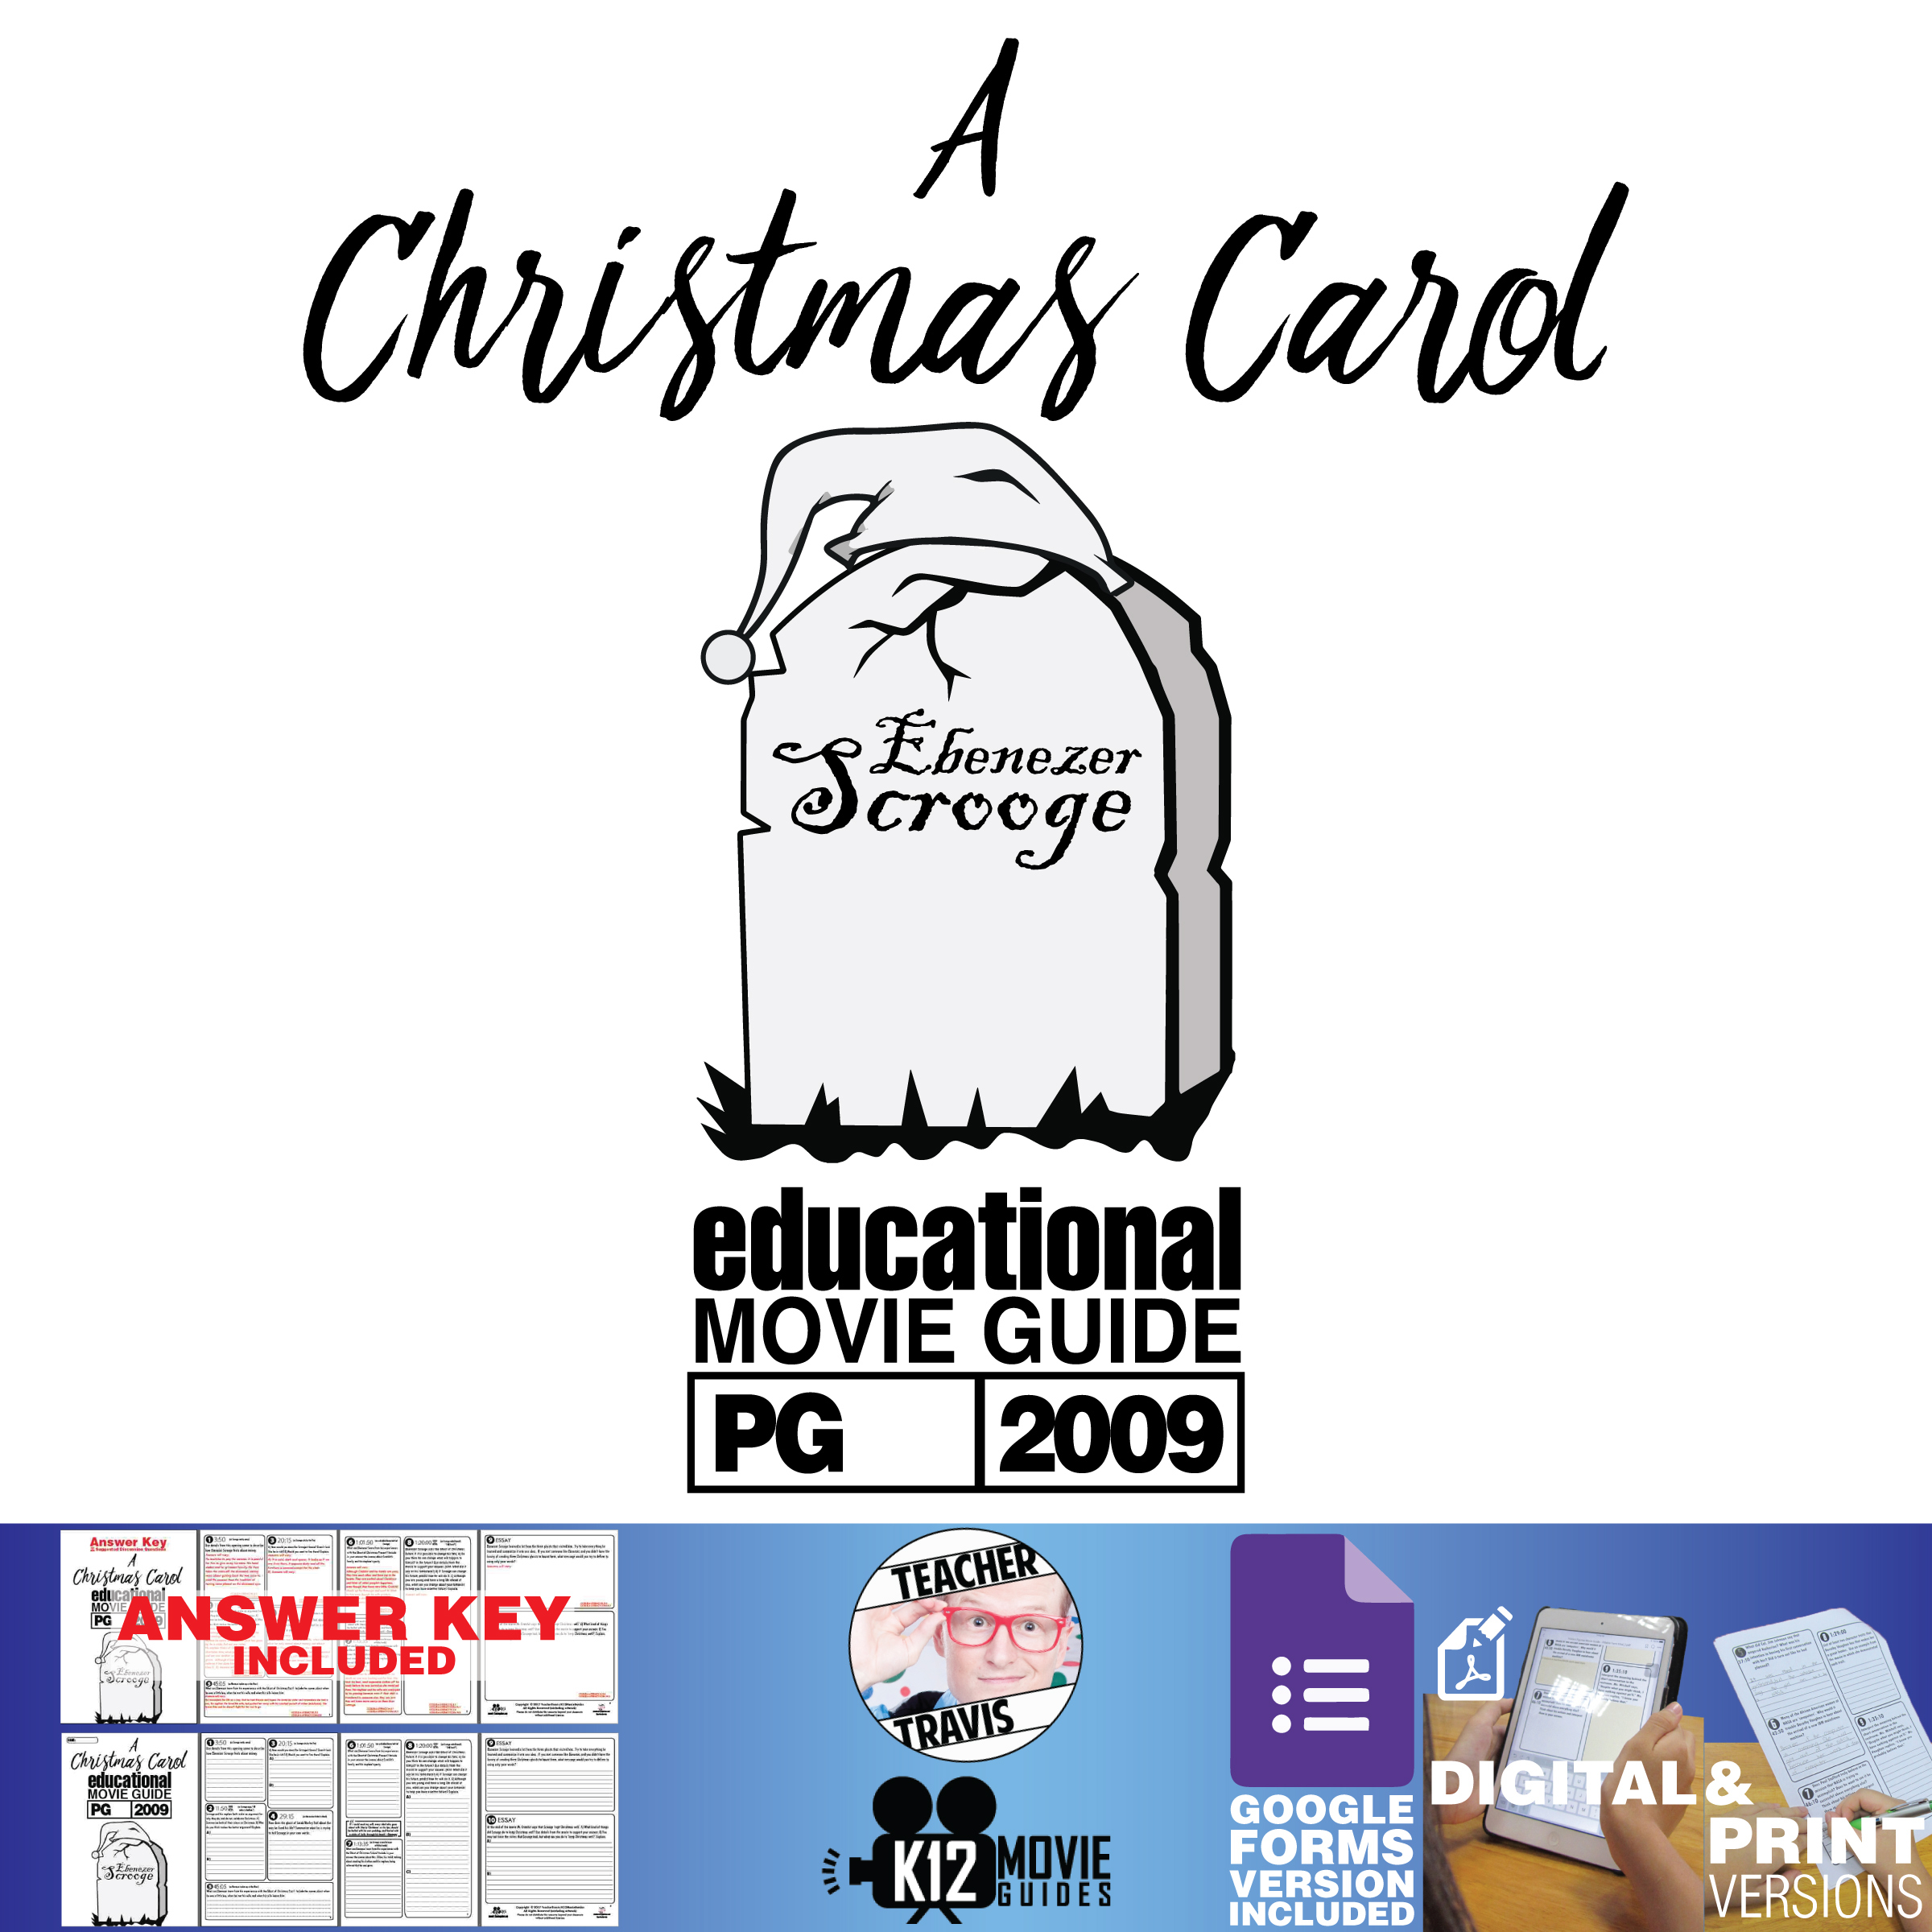 A Christmas Carol Movie Viewing Guide | Questions | Google Forms (Pg - 2009)